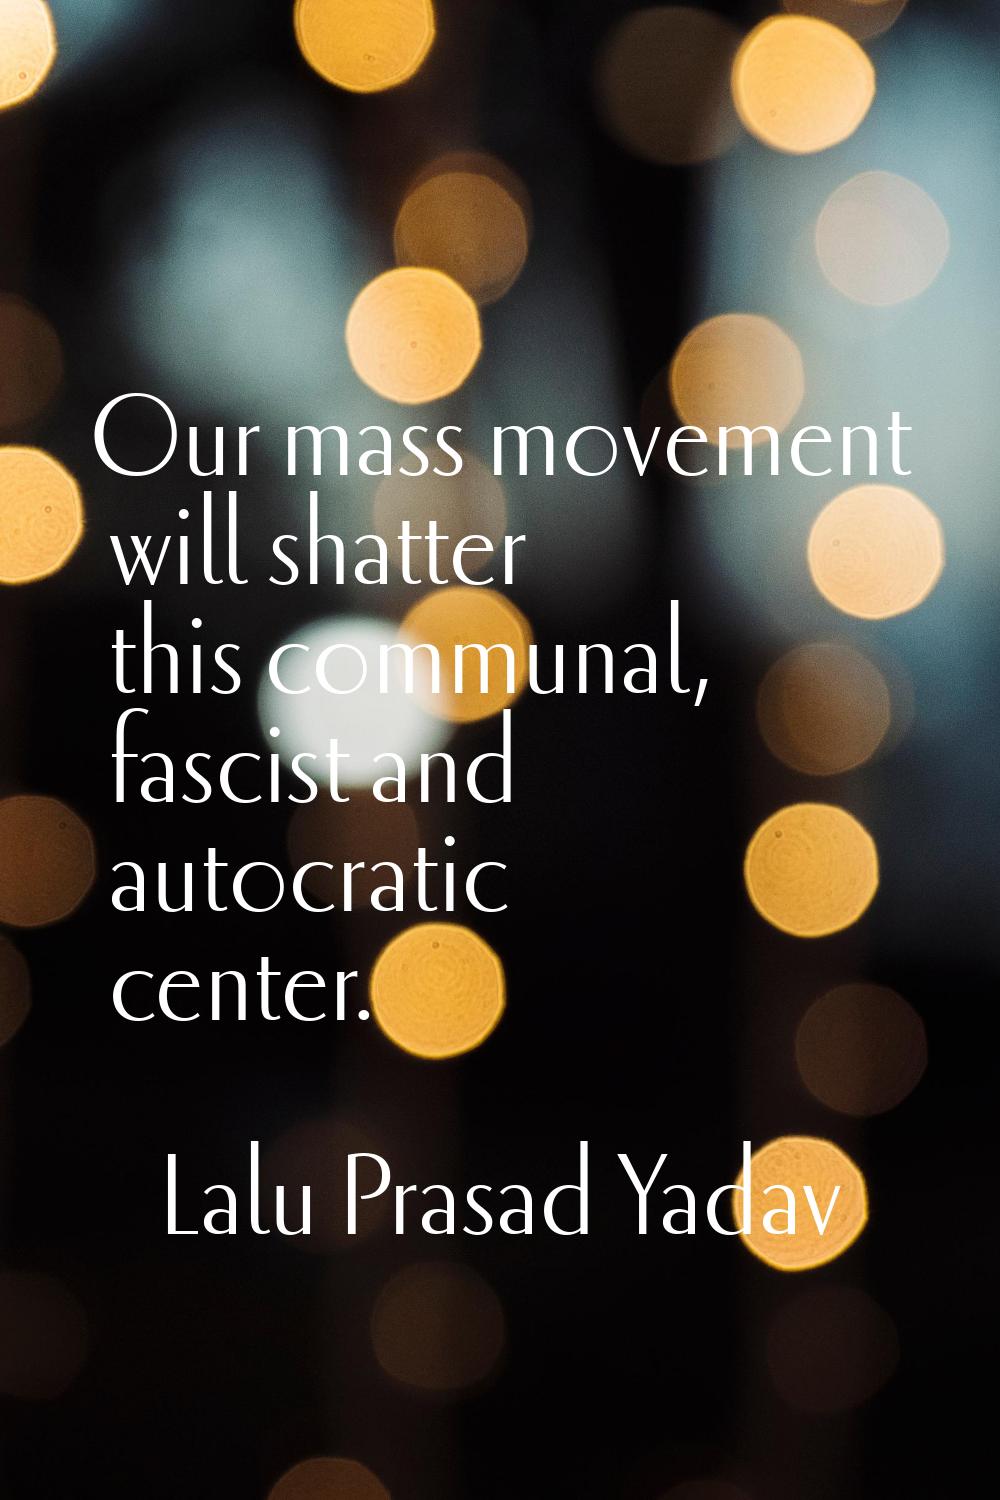 Our mass movement will shatter this communal, fascist and autocratic center.